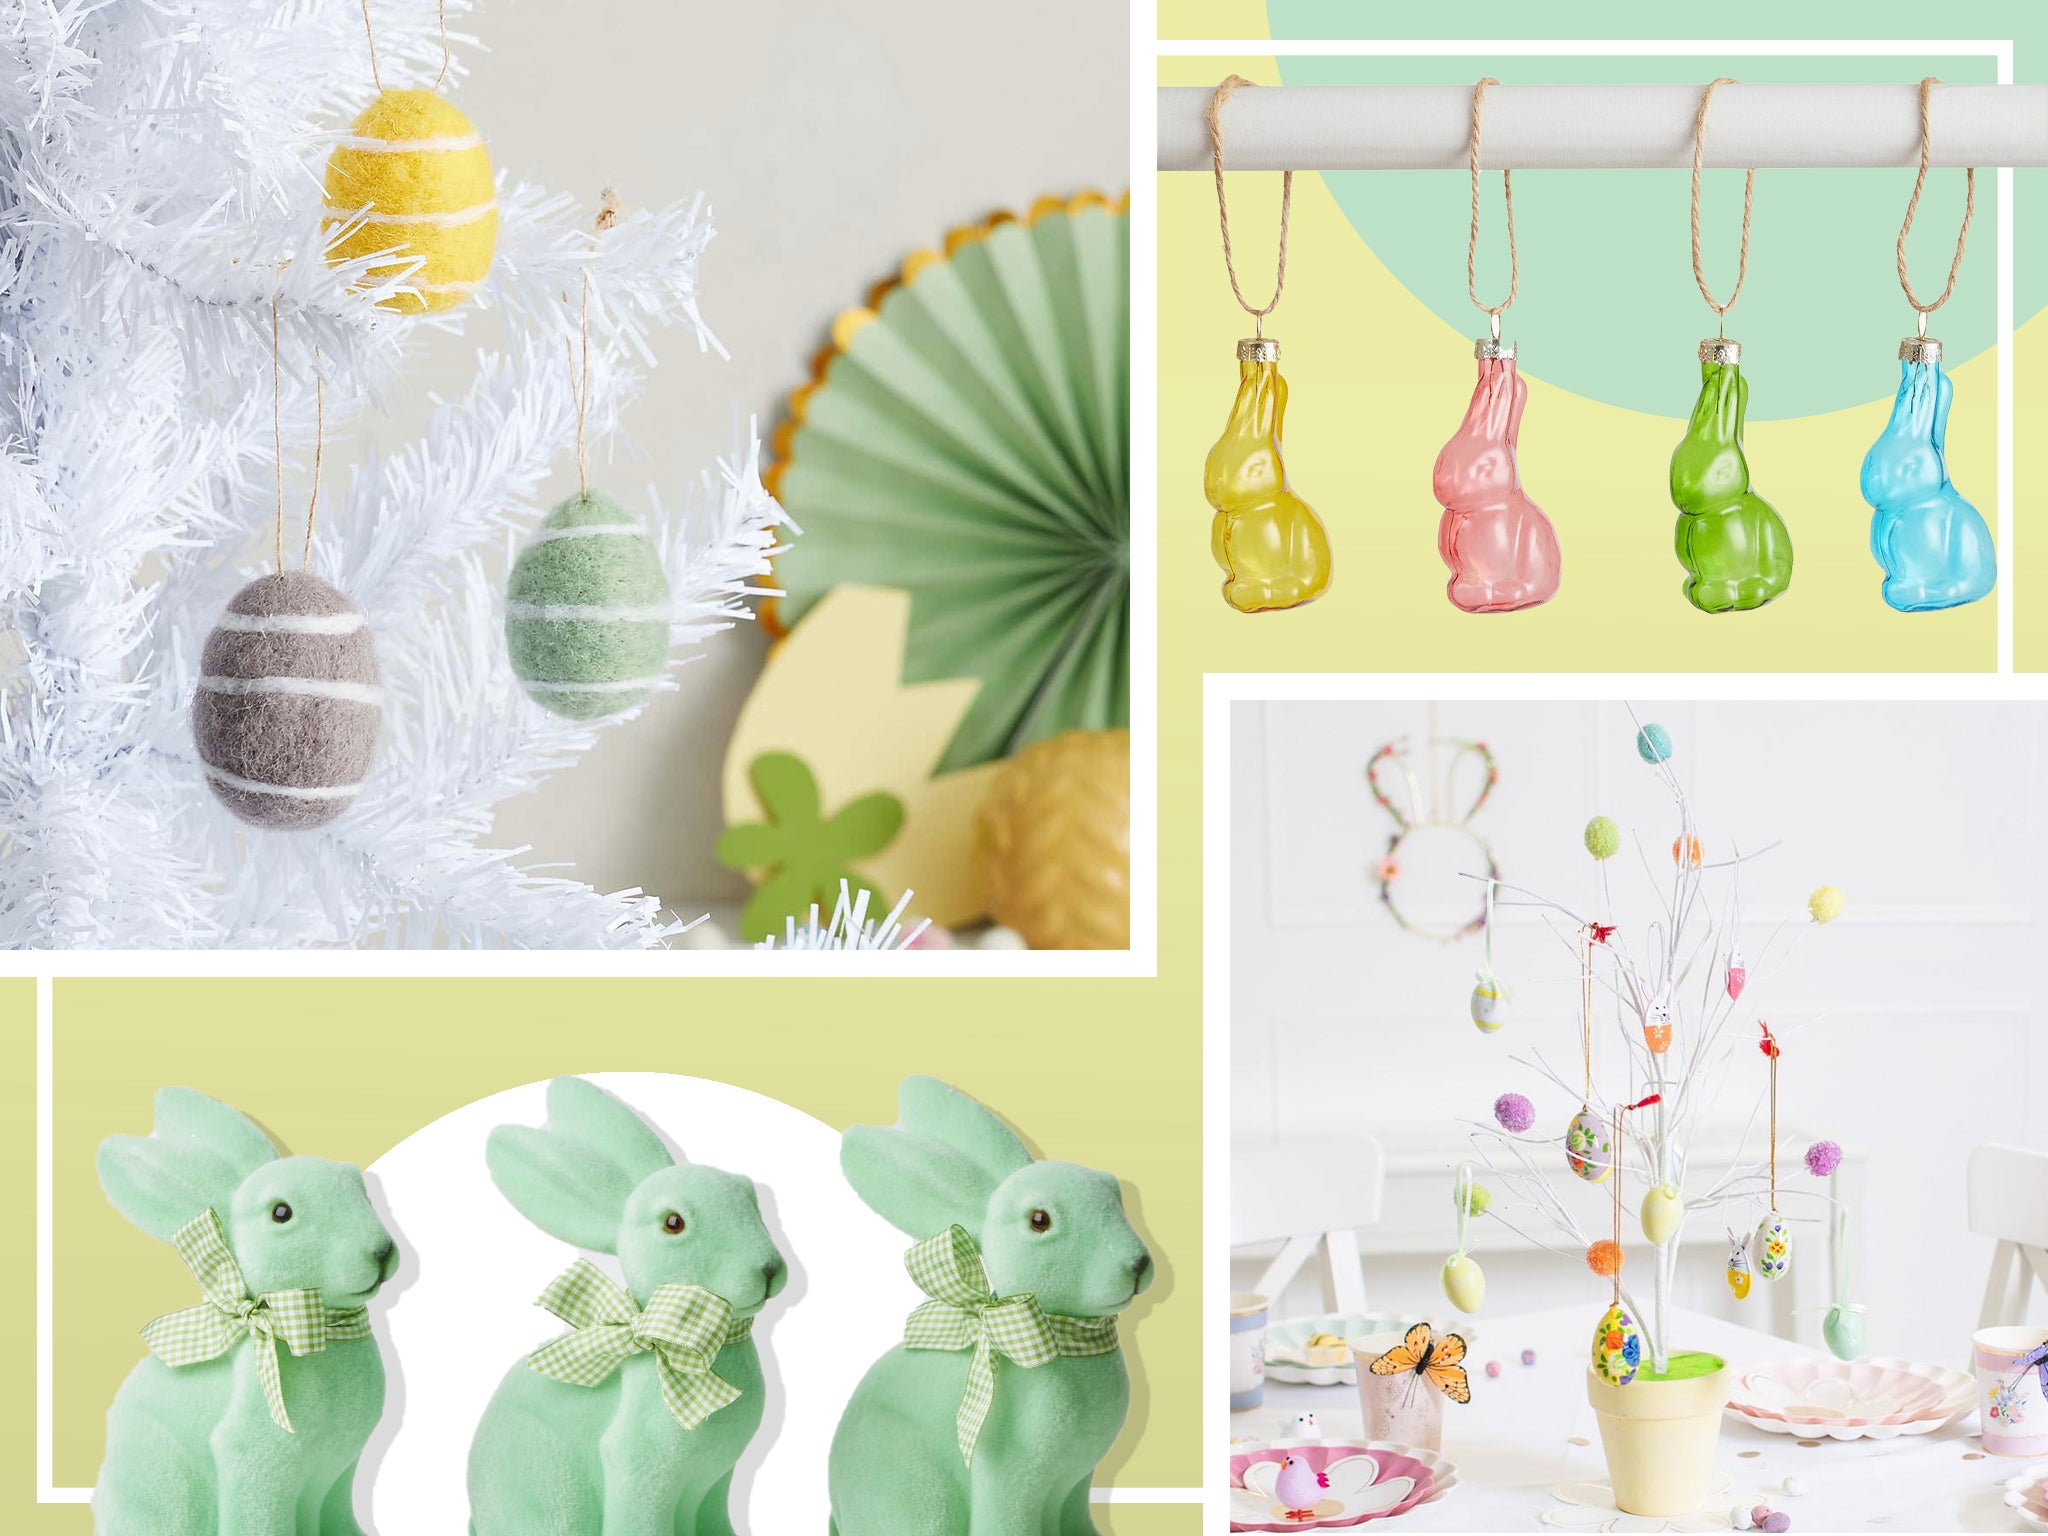 Easter tree ideas: Where to buy one and how to decorate it